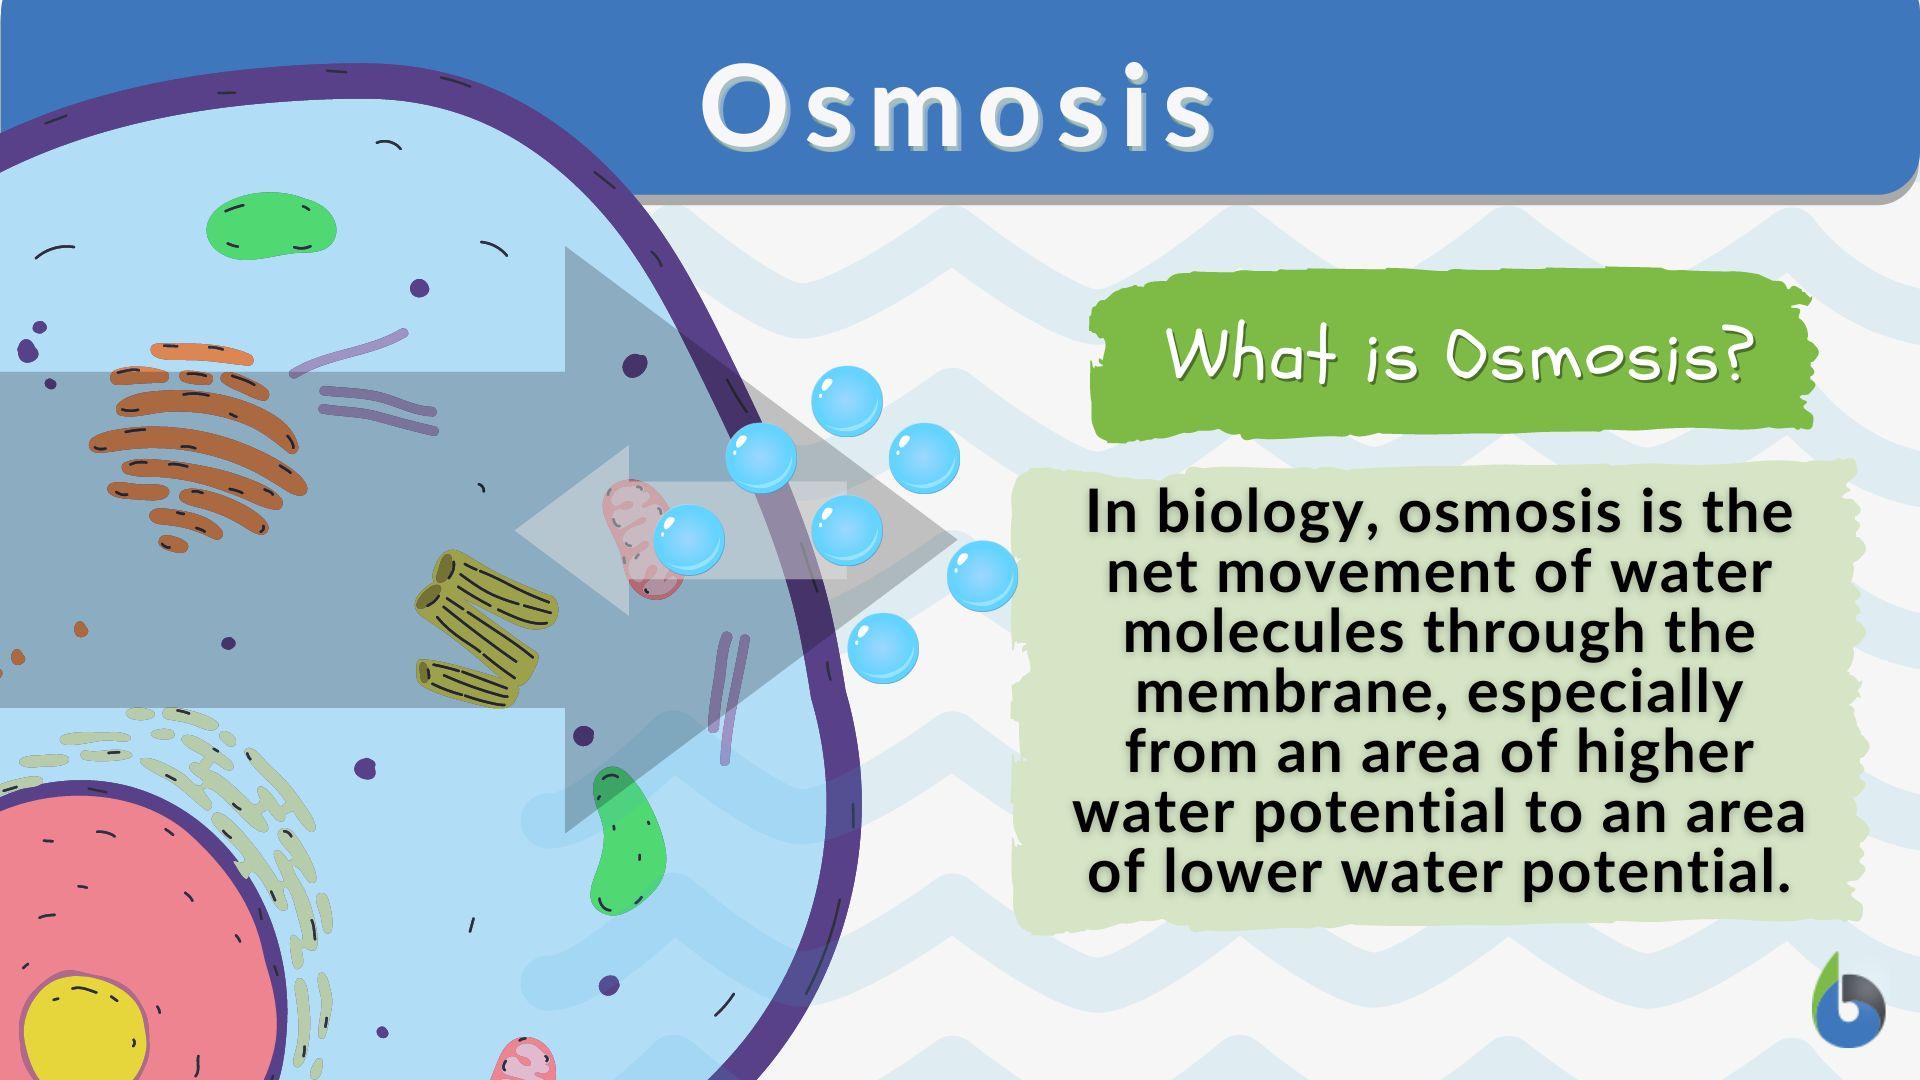 Osmosis - Definition and Examples - Biology Online Dictionary